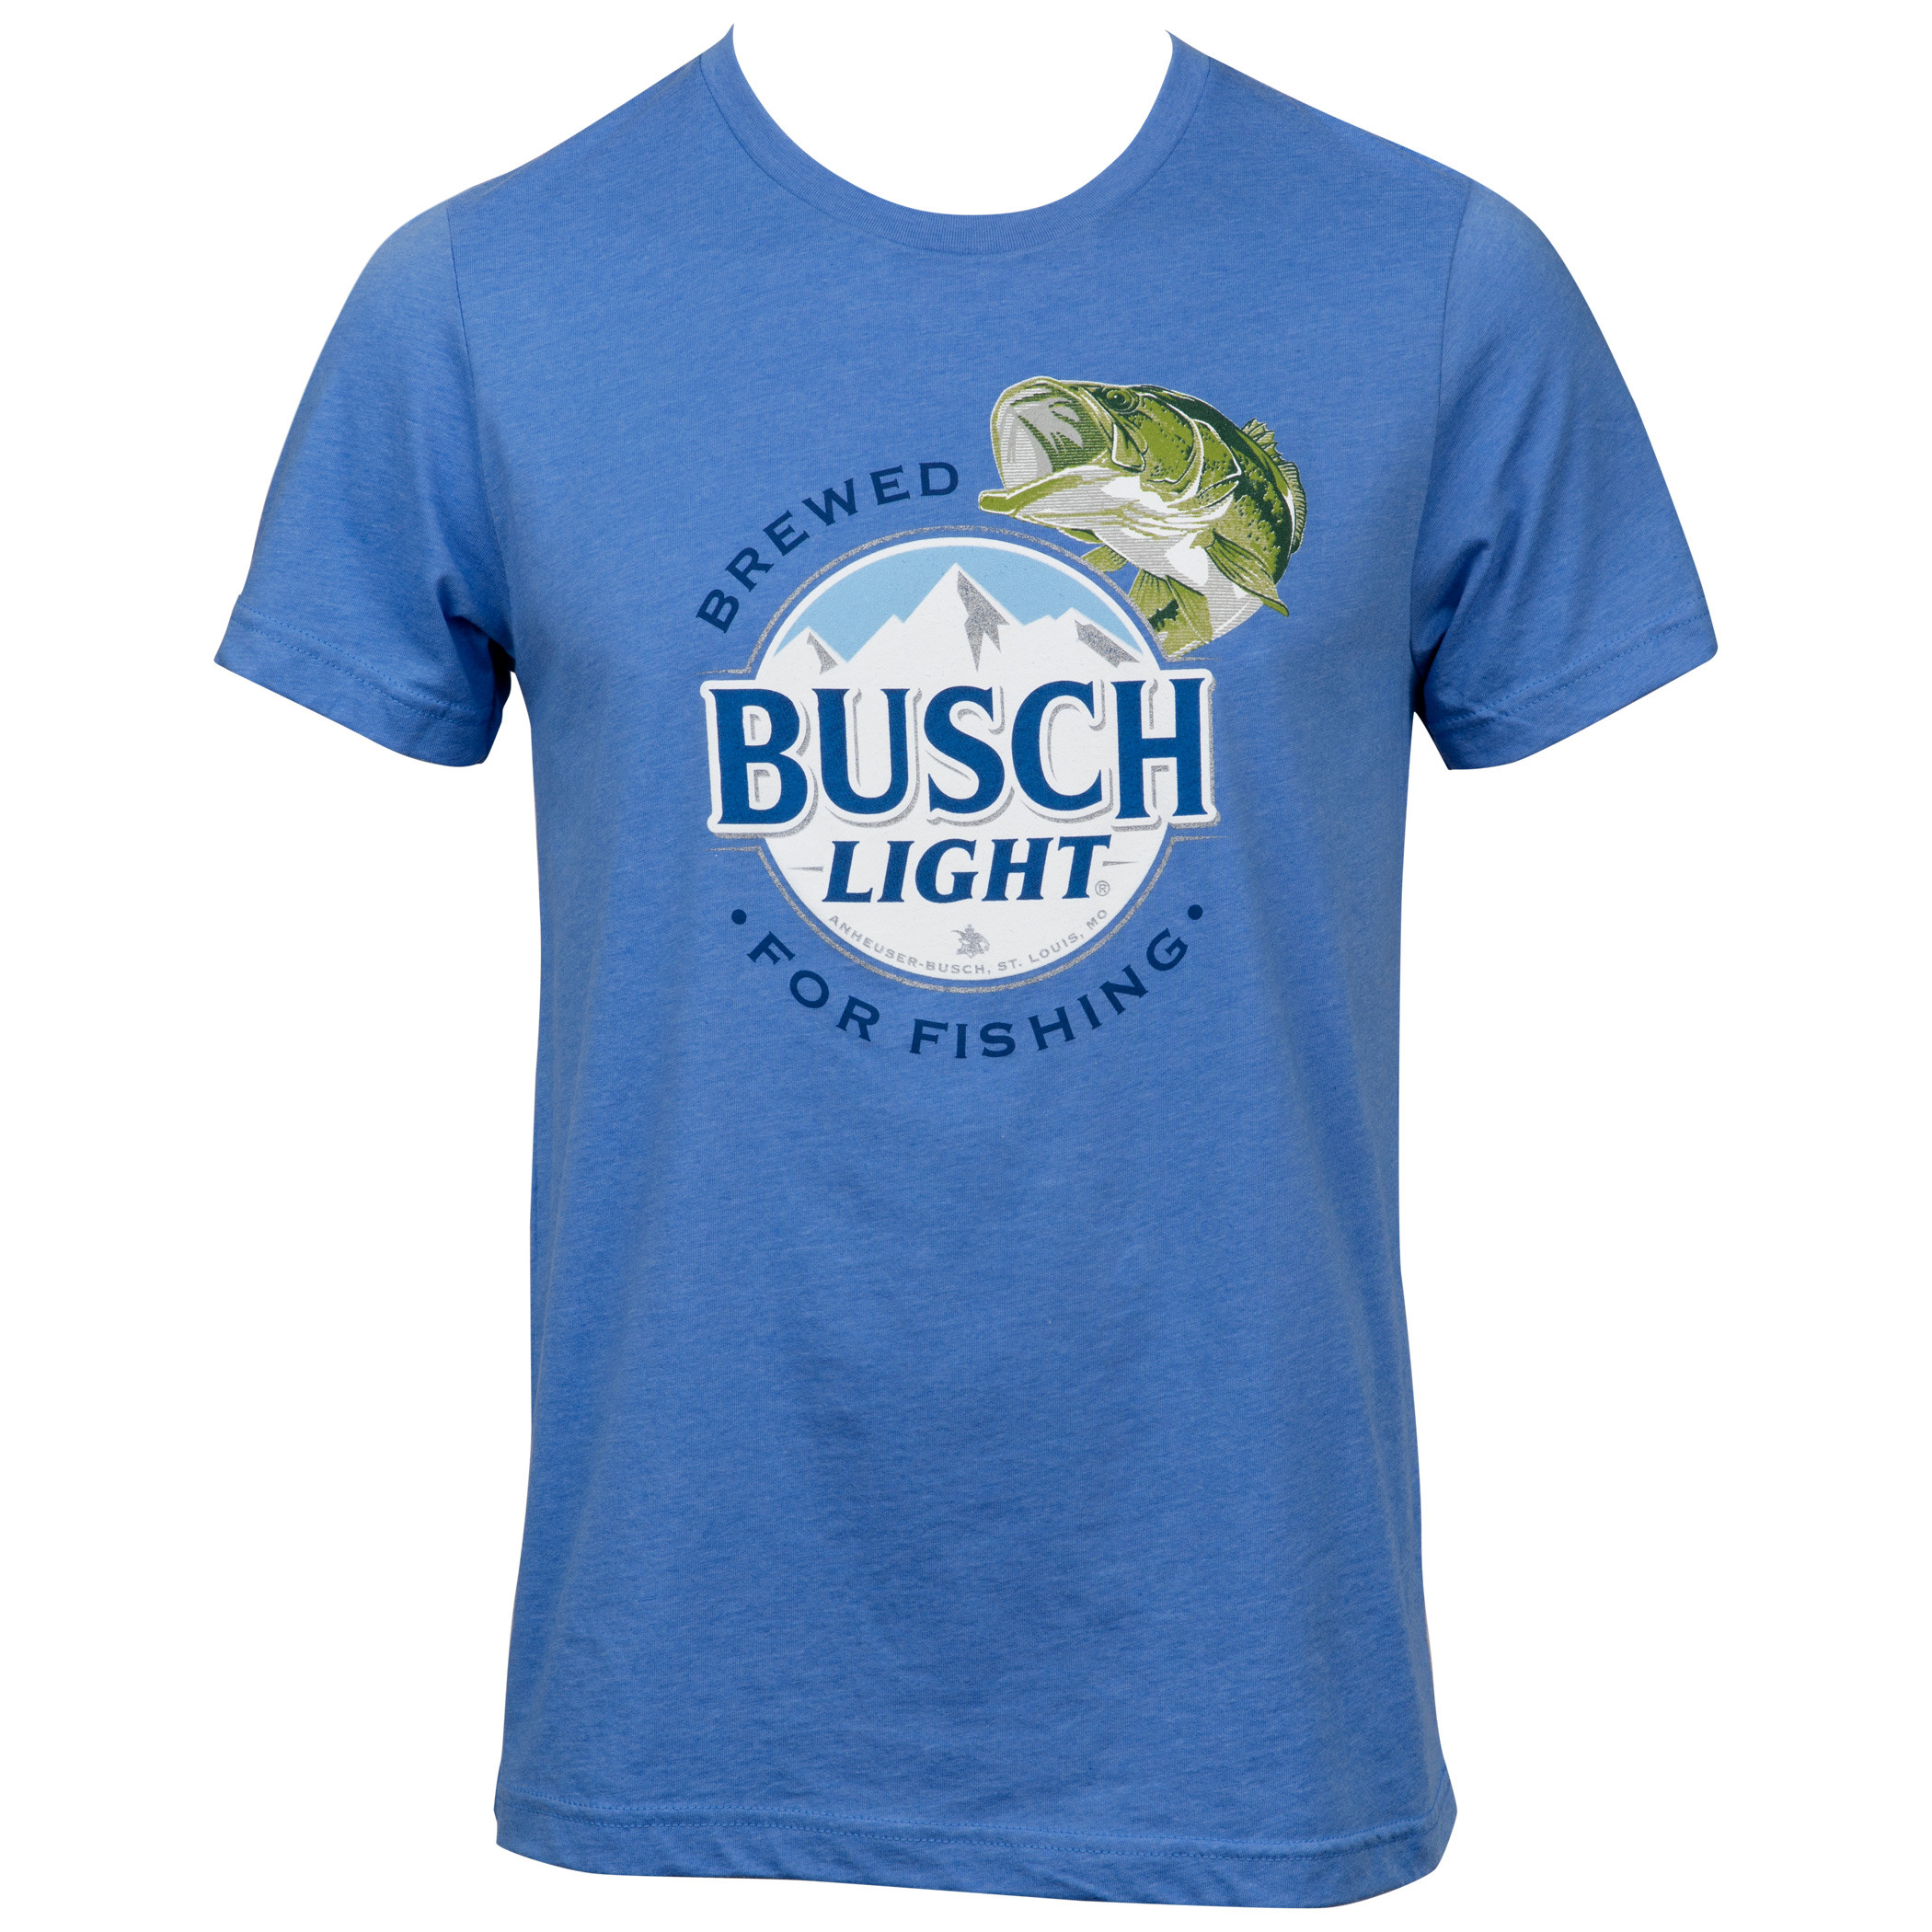 Busch Light Brewed for Fishing Blue Colorway T-Shirt